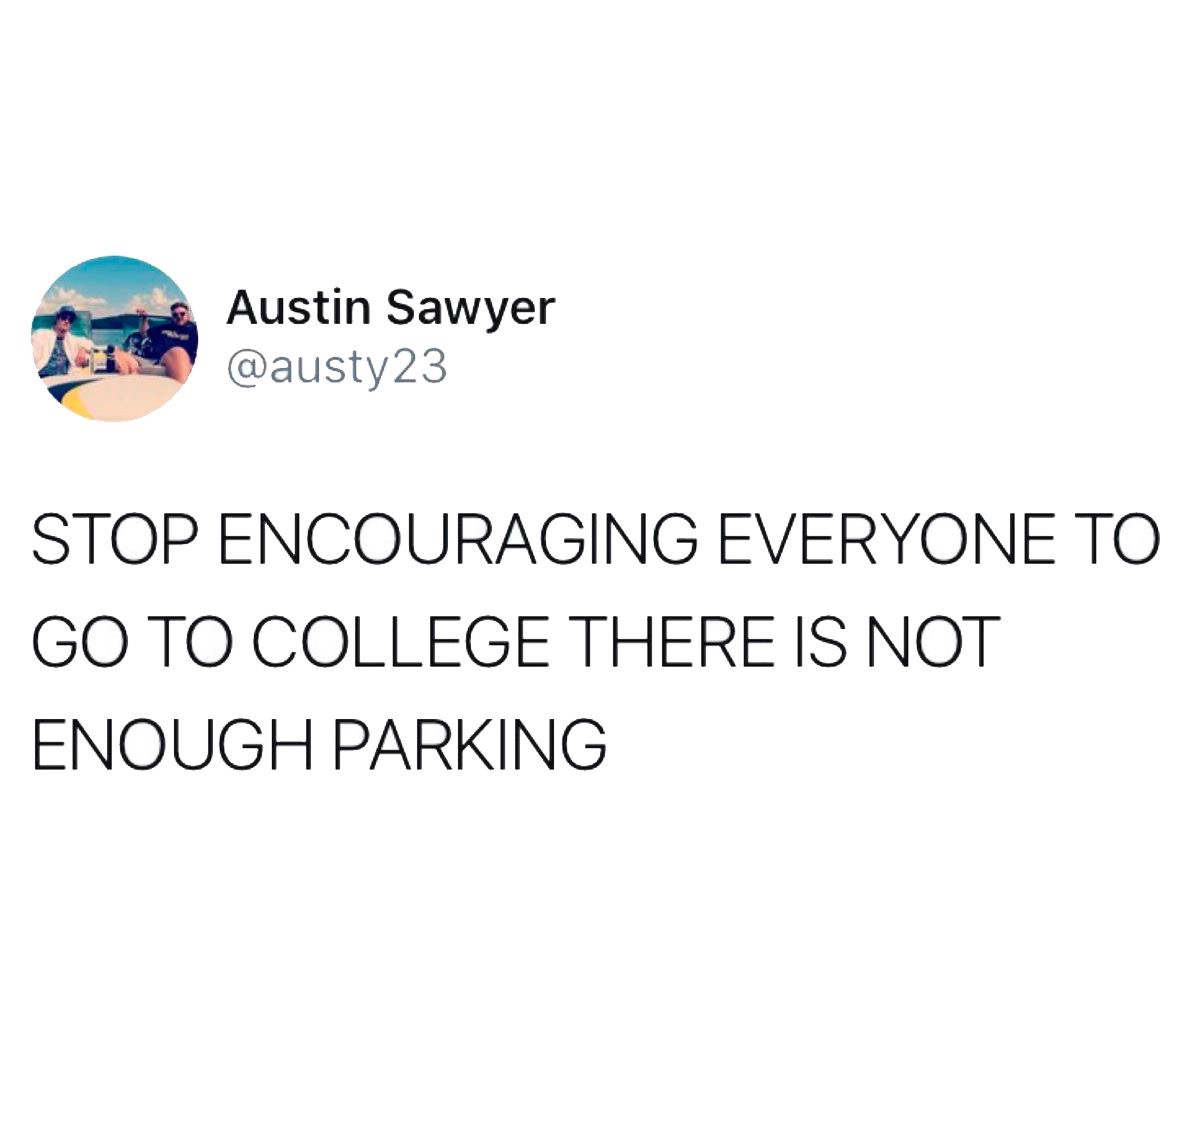 Funny tweet about stop telling everyone to go to college, there is not enough parking.